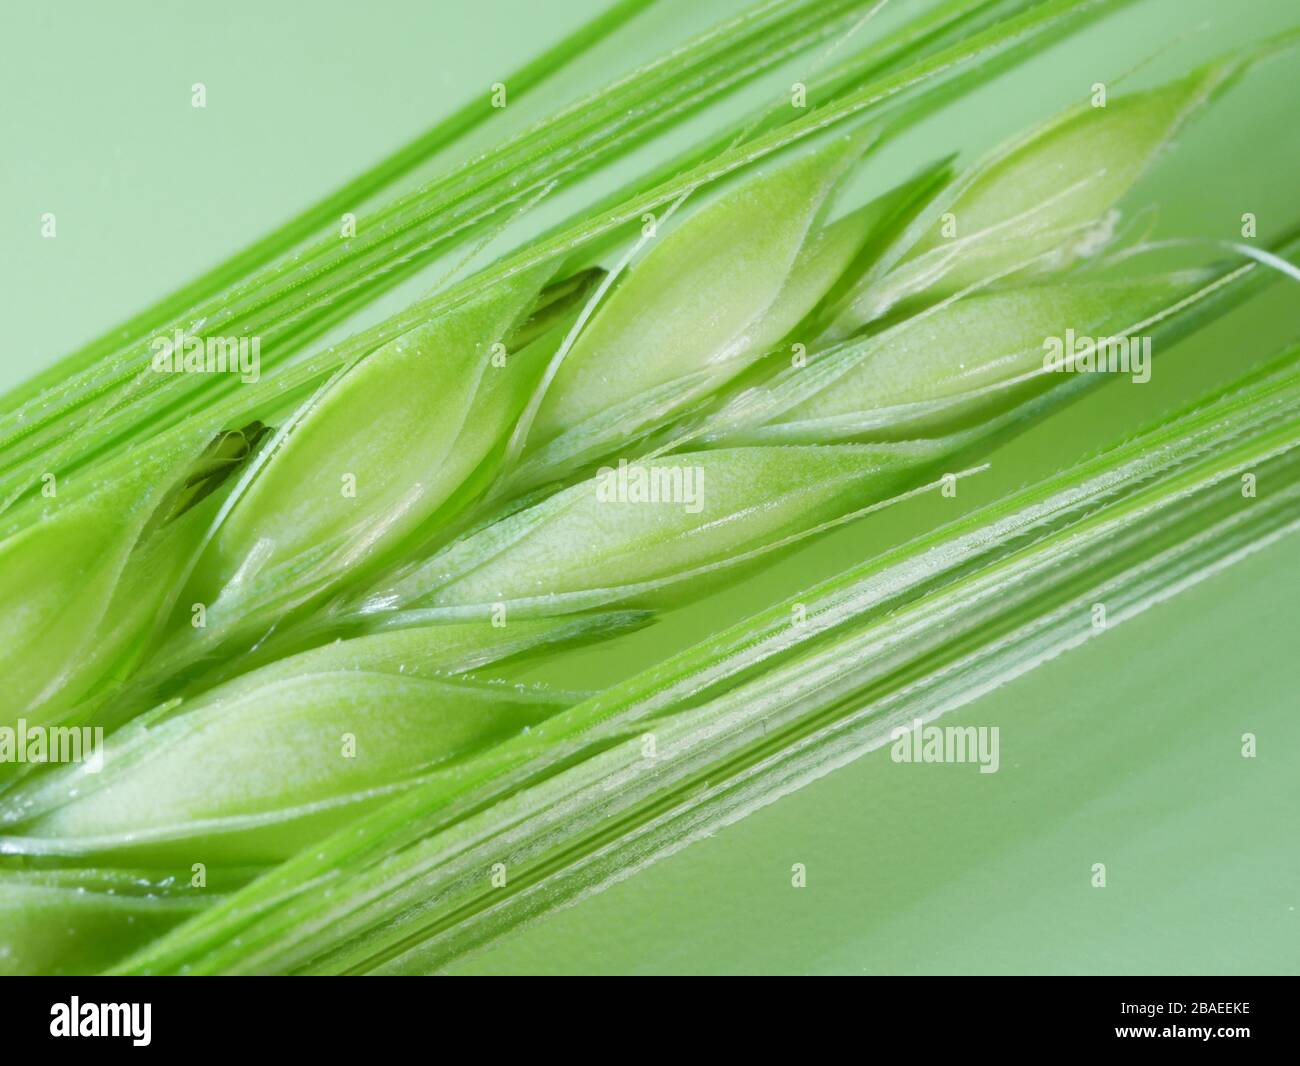 Close up of fresh green Barley flower spike seed and awns isolated against a green background Stock Photo